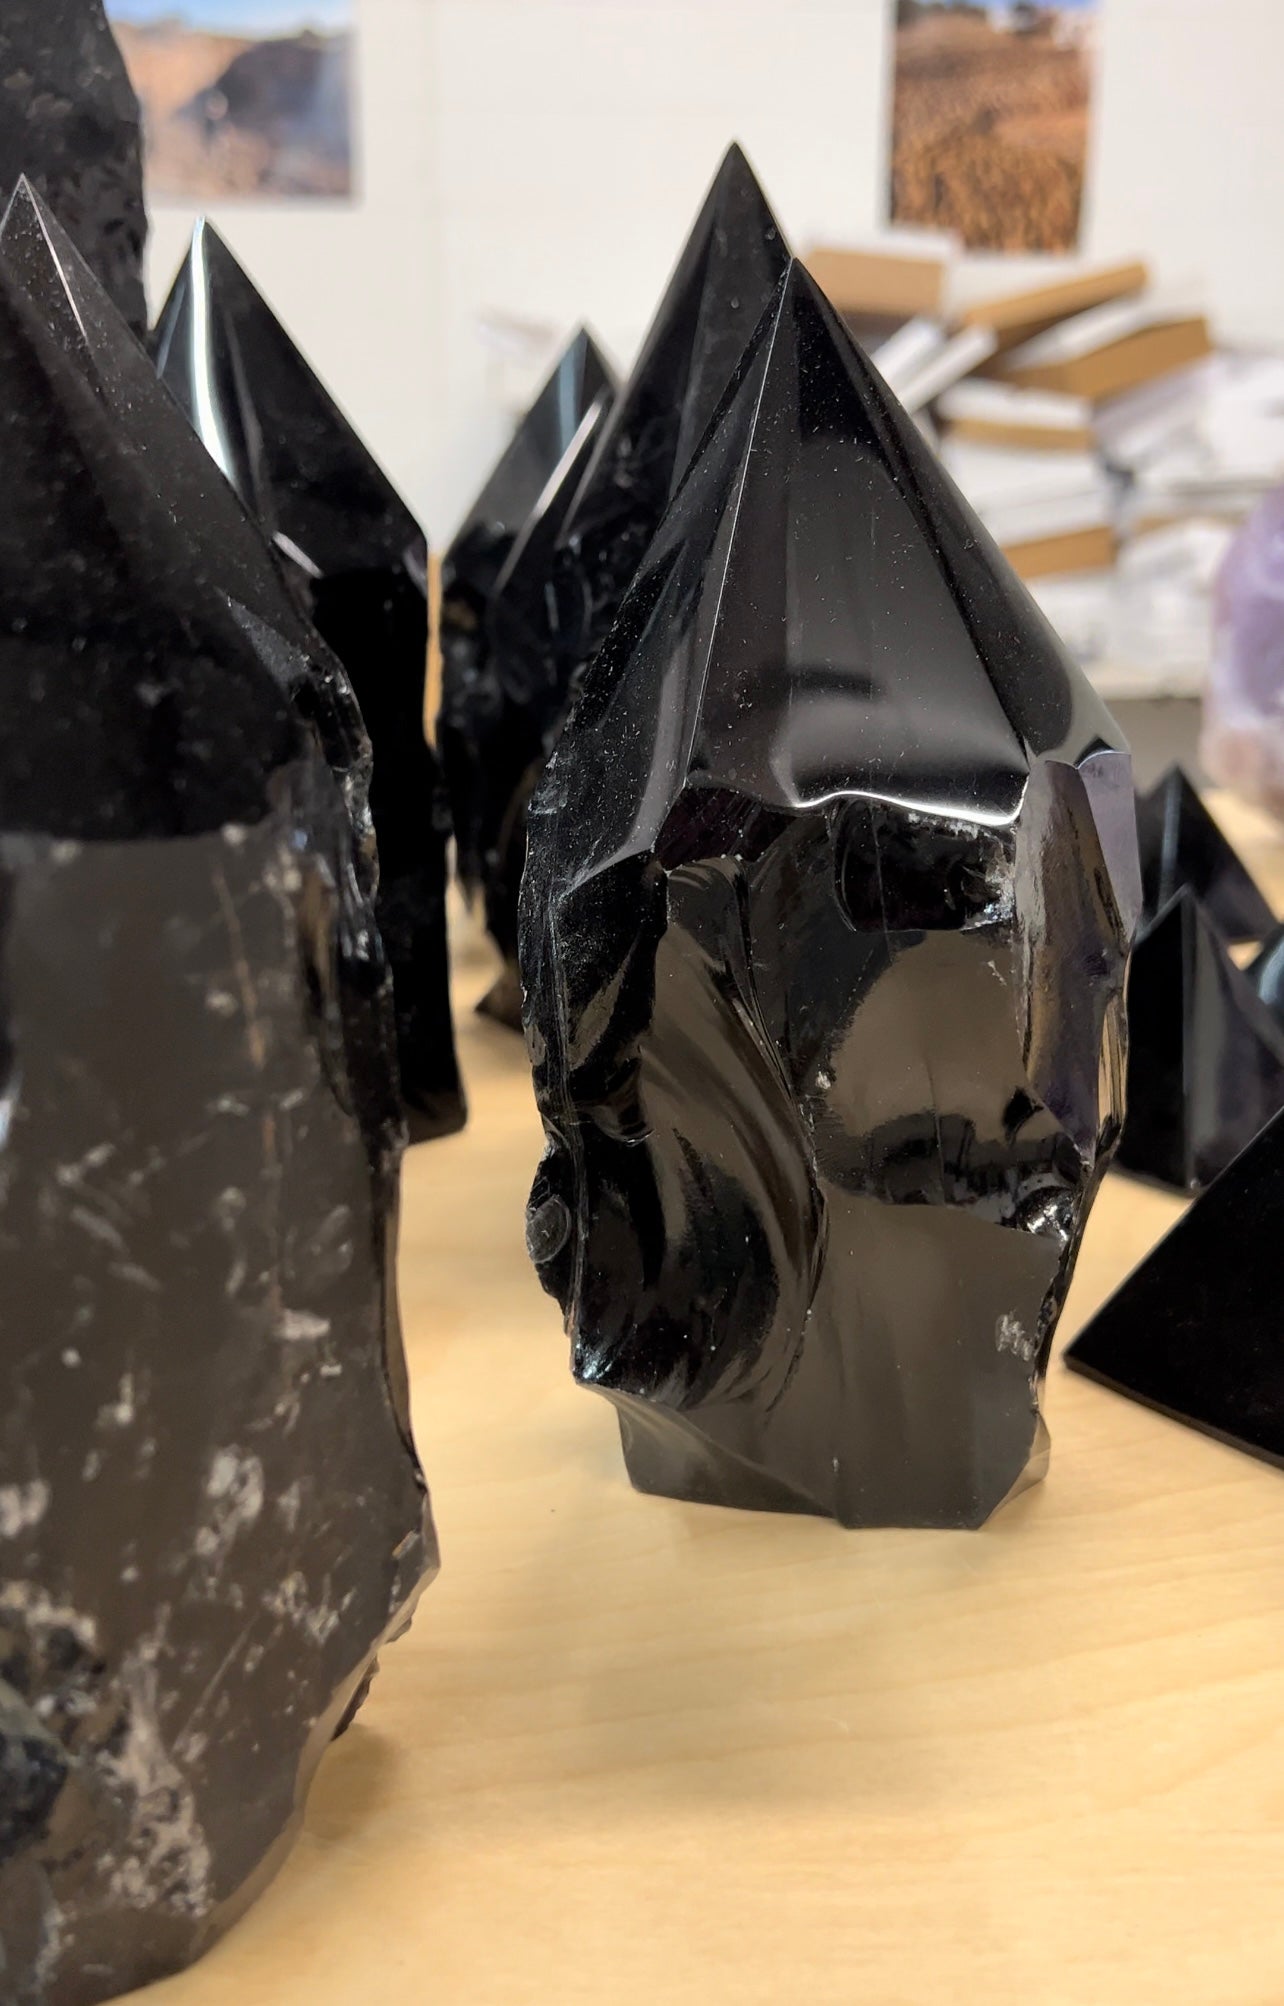 Big Black Obsidian point for Protection